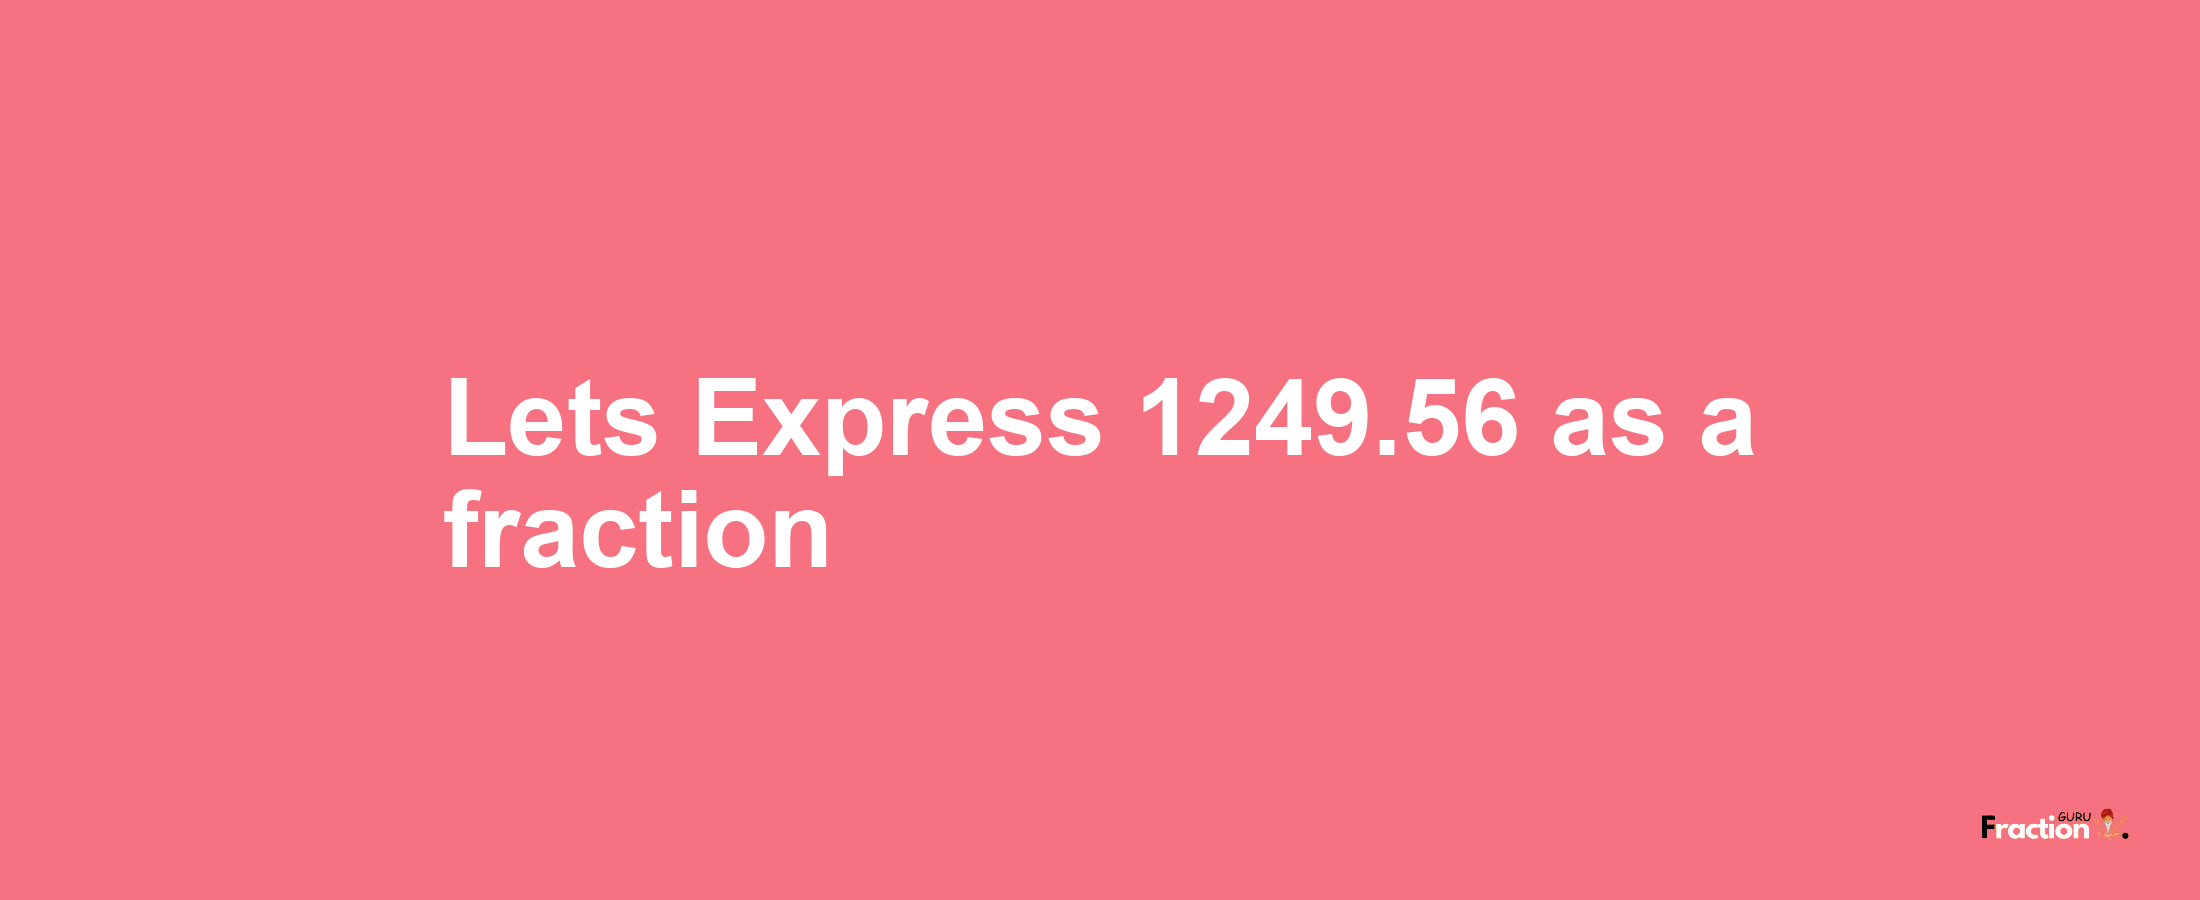 Lets Express 1249.56 as afraction